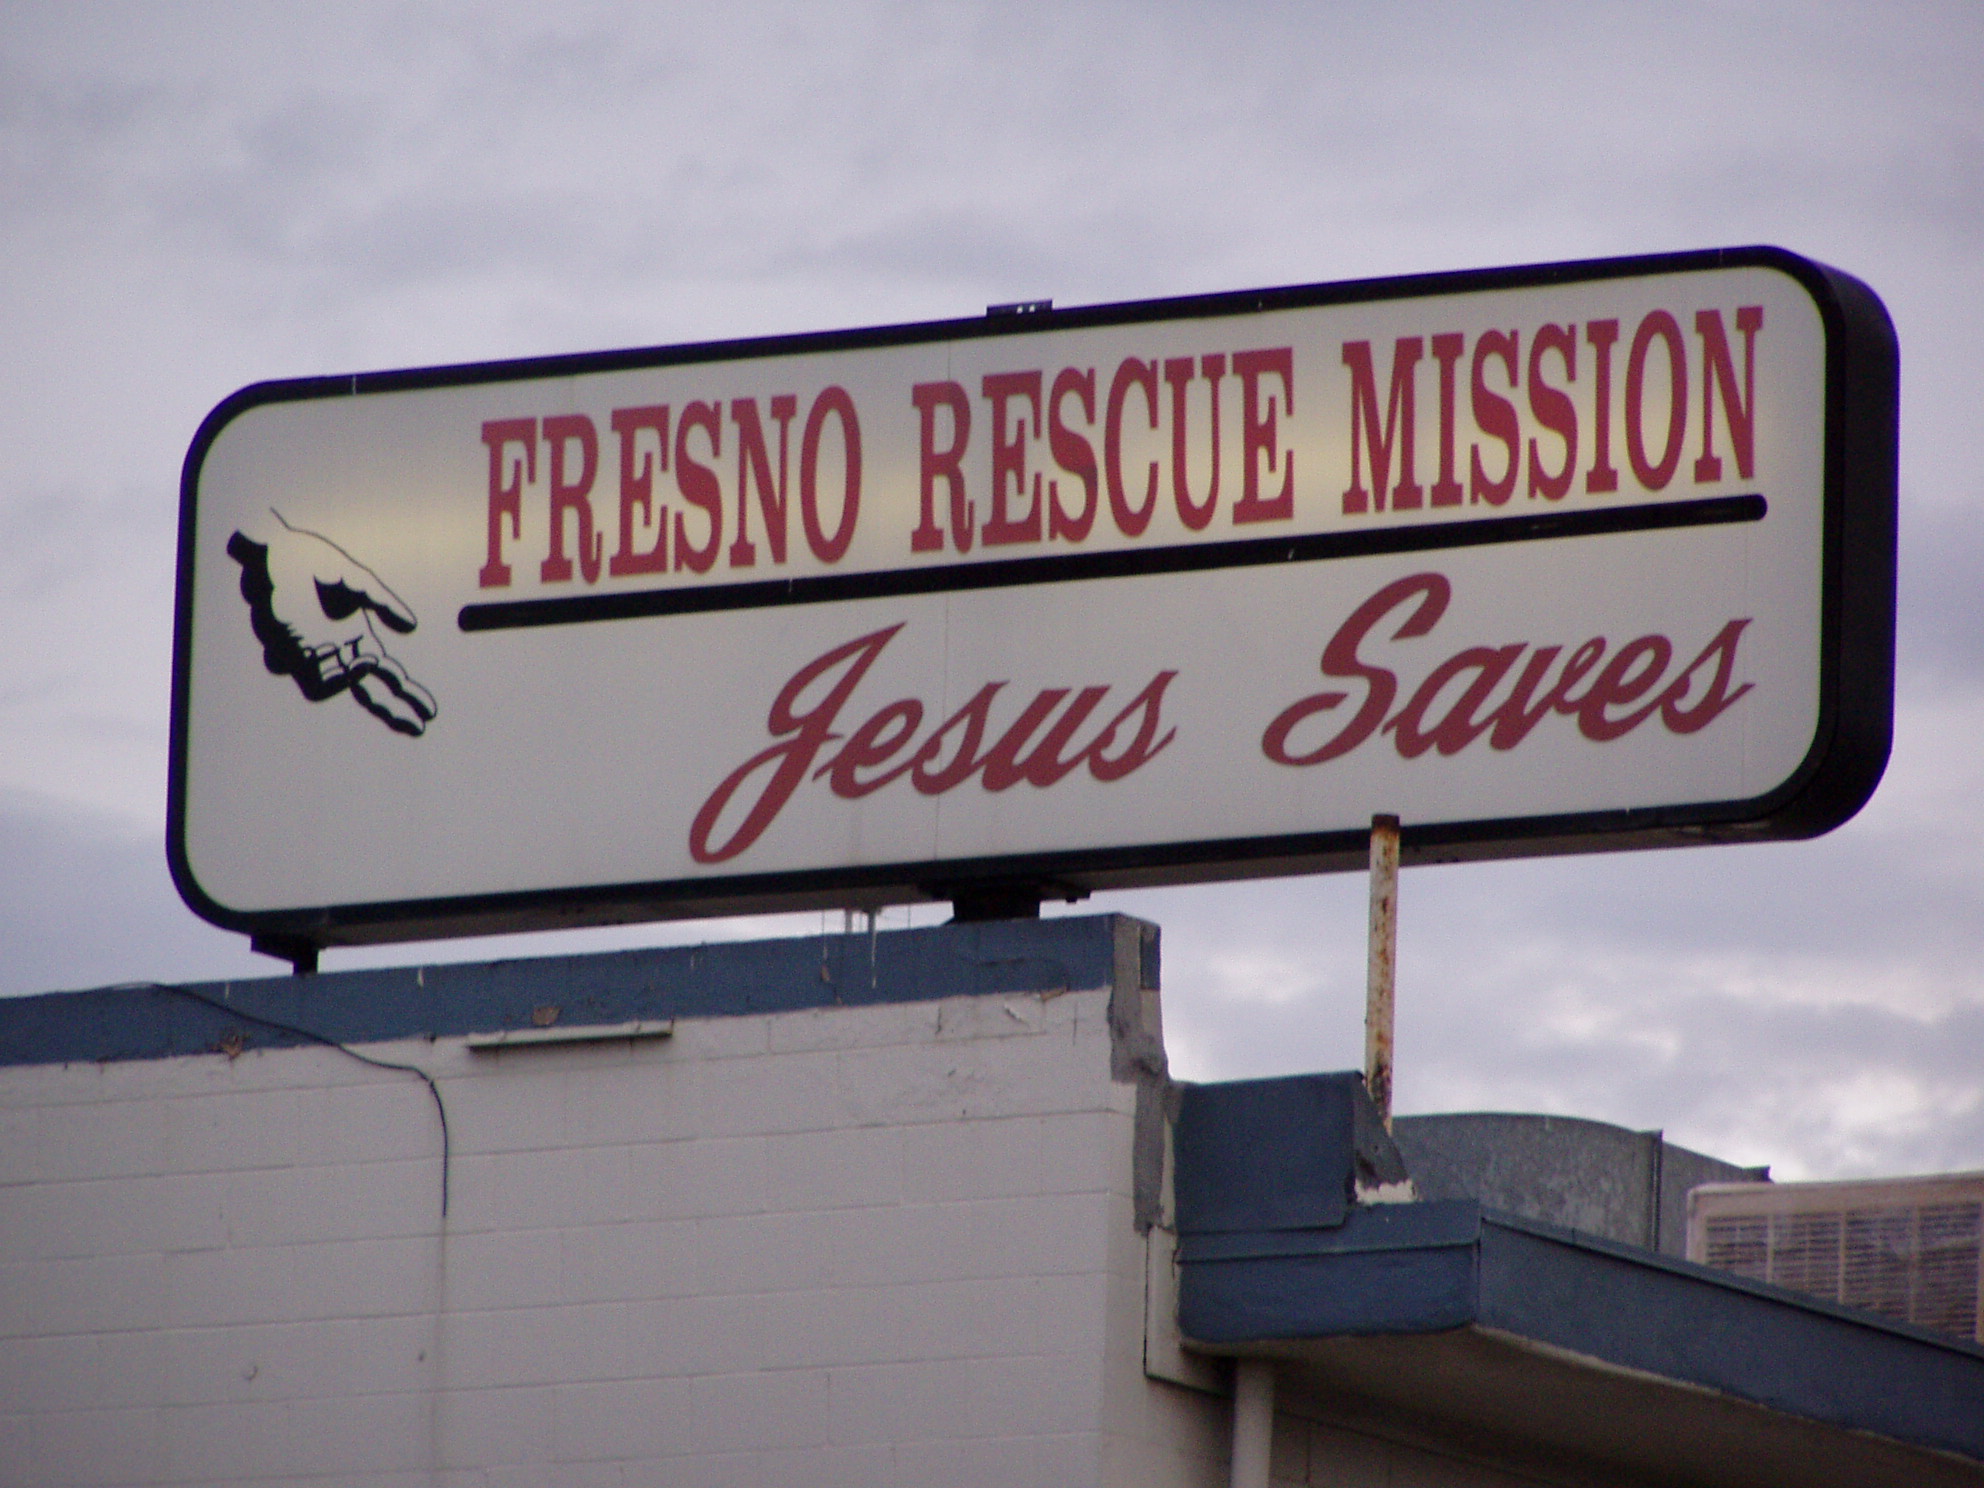 Many people in the community believe that the Rescue Mission helps the homeless, serves them meals and is the place of last resort where anyone can go to get off the mean streets of Fresno. You are about to learn that there is a whole lot more to the story.